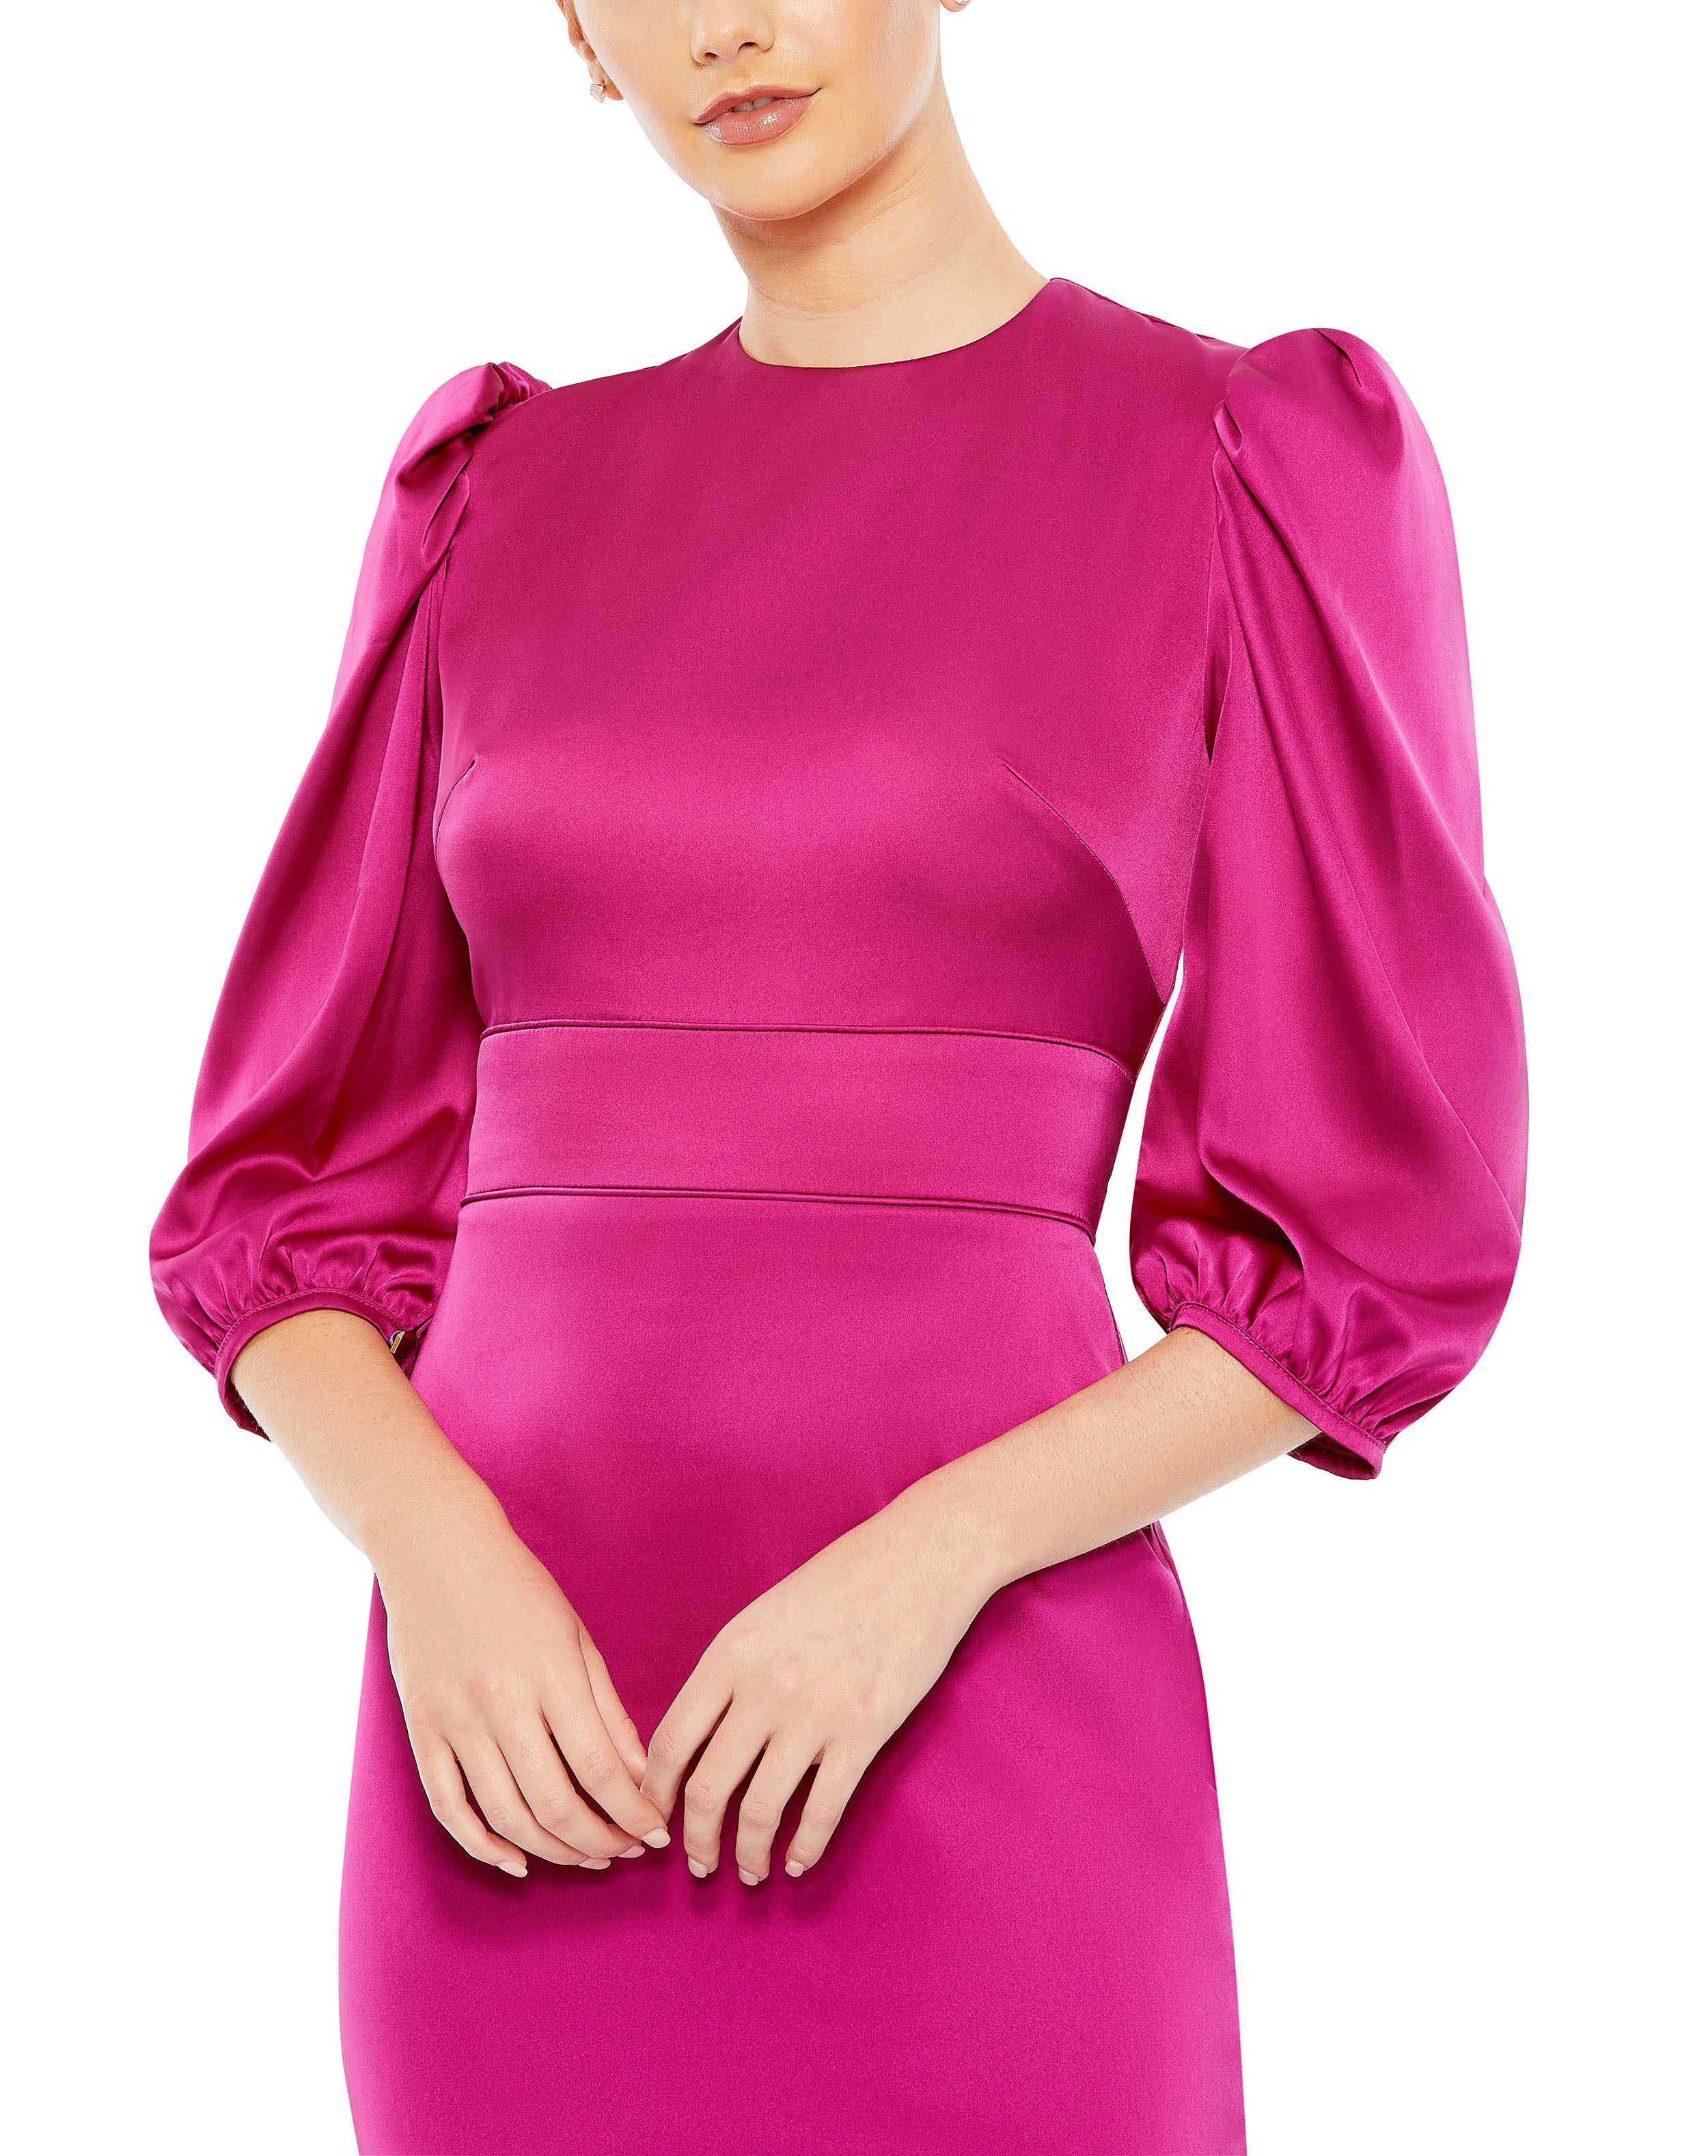 High Neck Satin dress with 3/4 sleeves